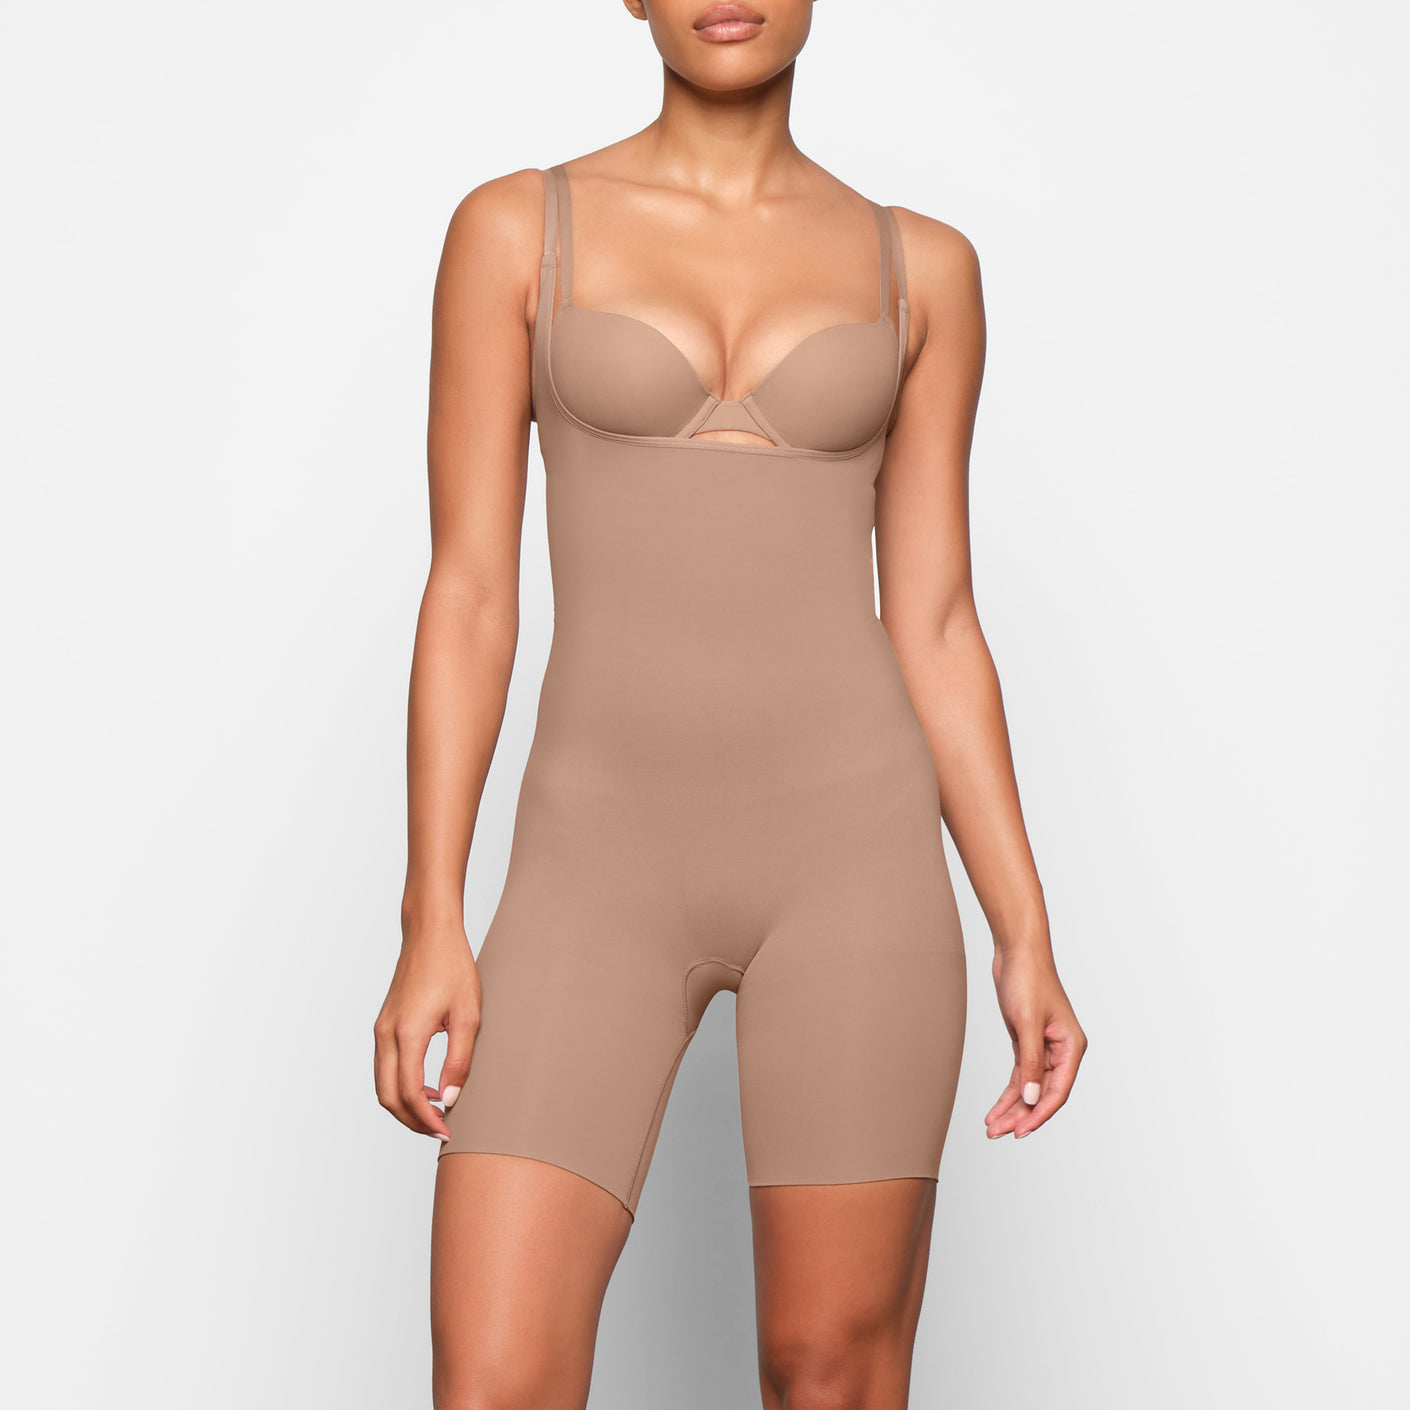 Highly recommend this bodysuit- makes your body look so snatched